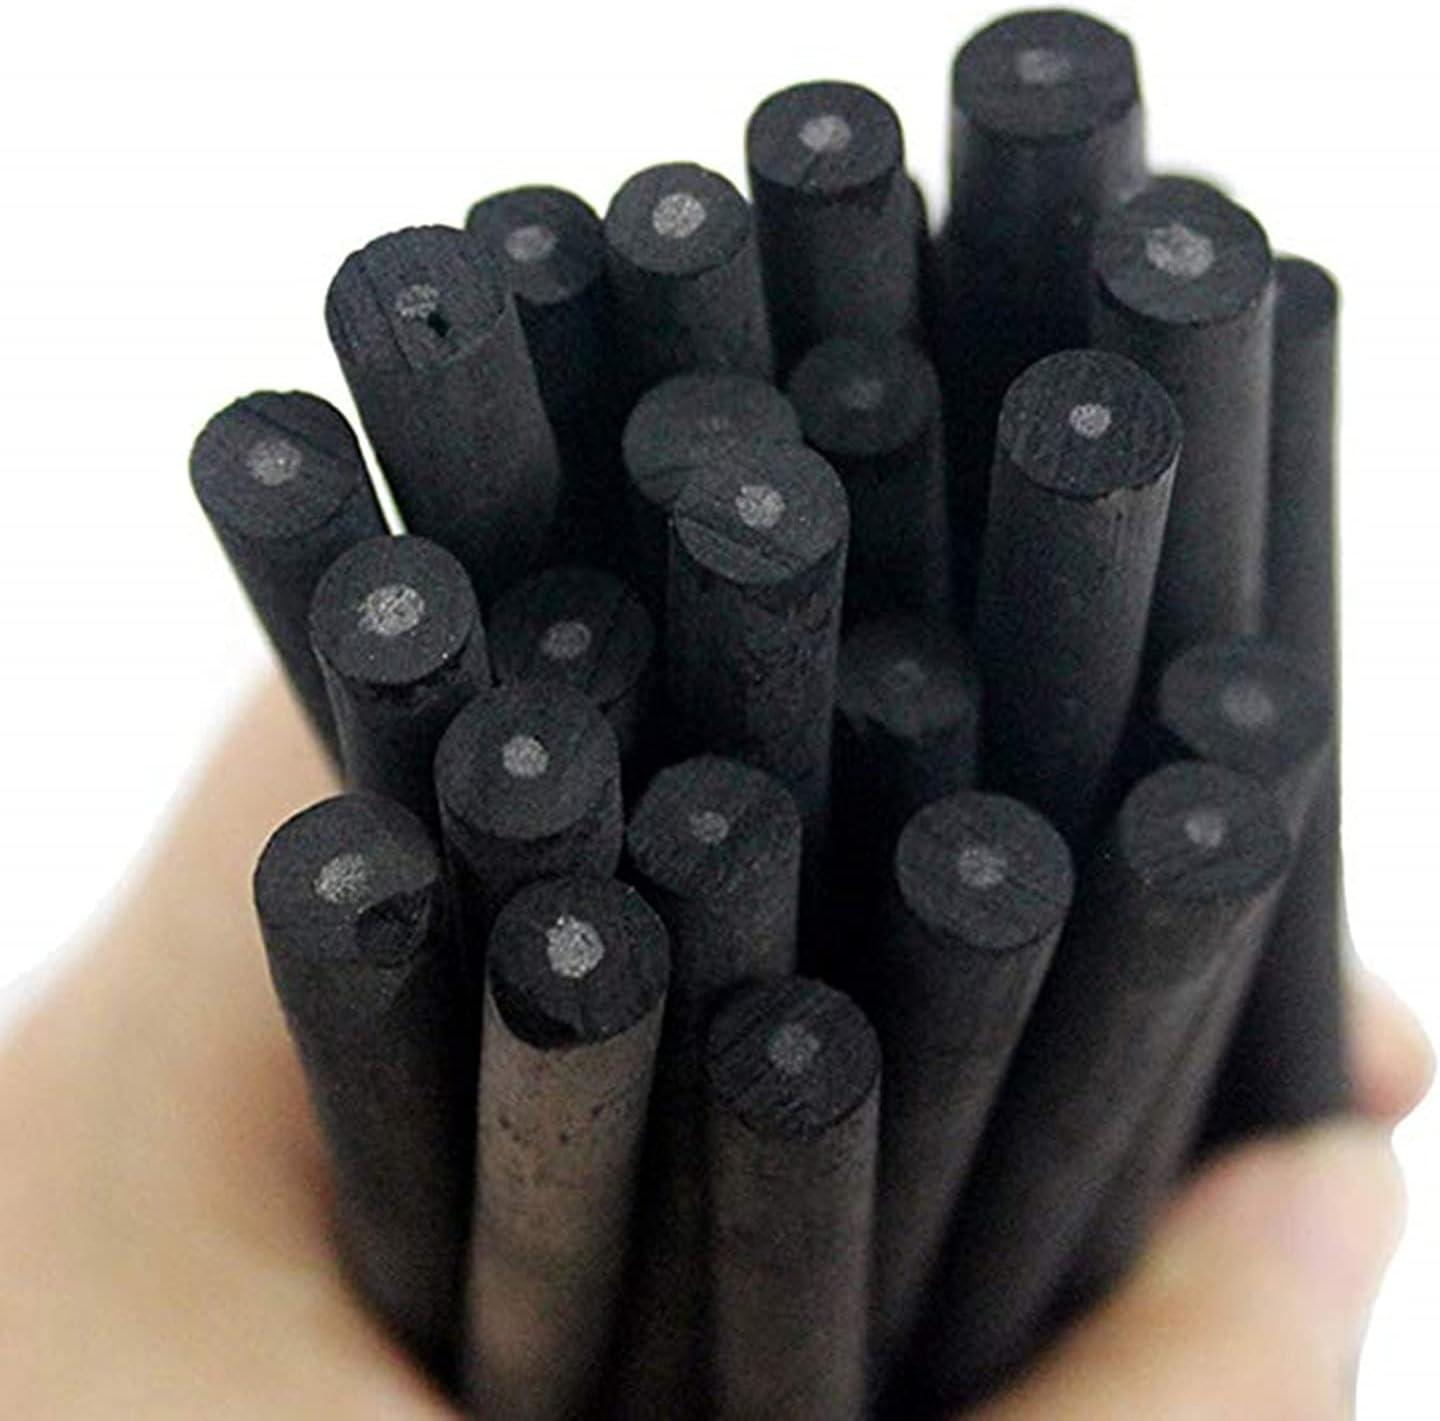 Willow Charcoal Set 30-Count